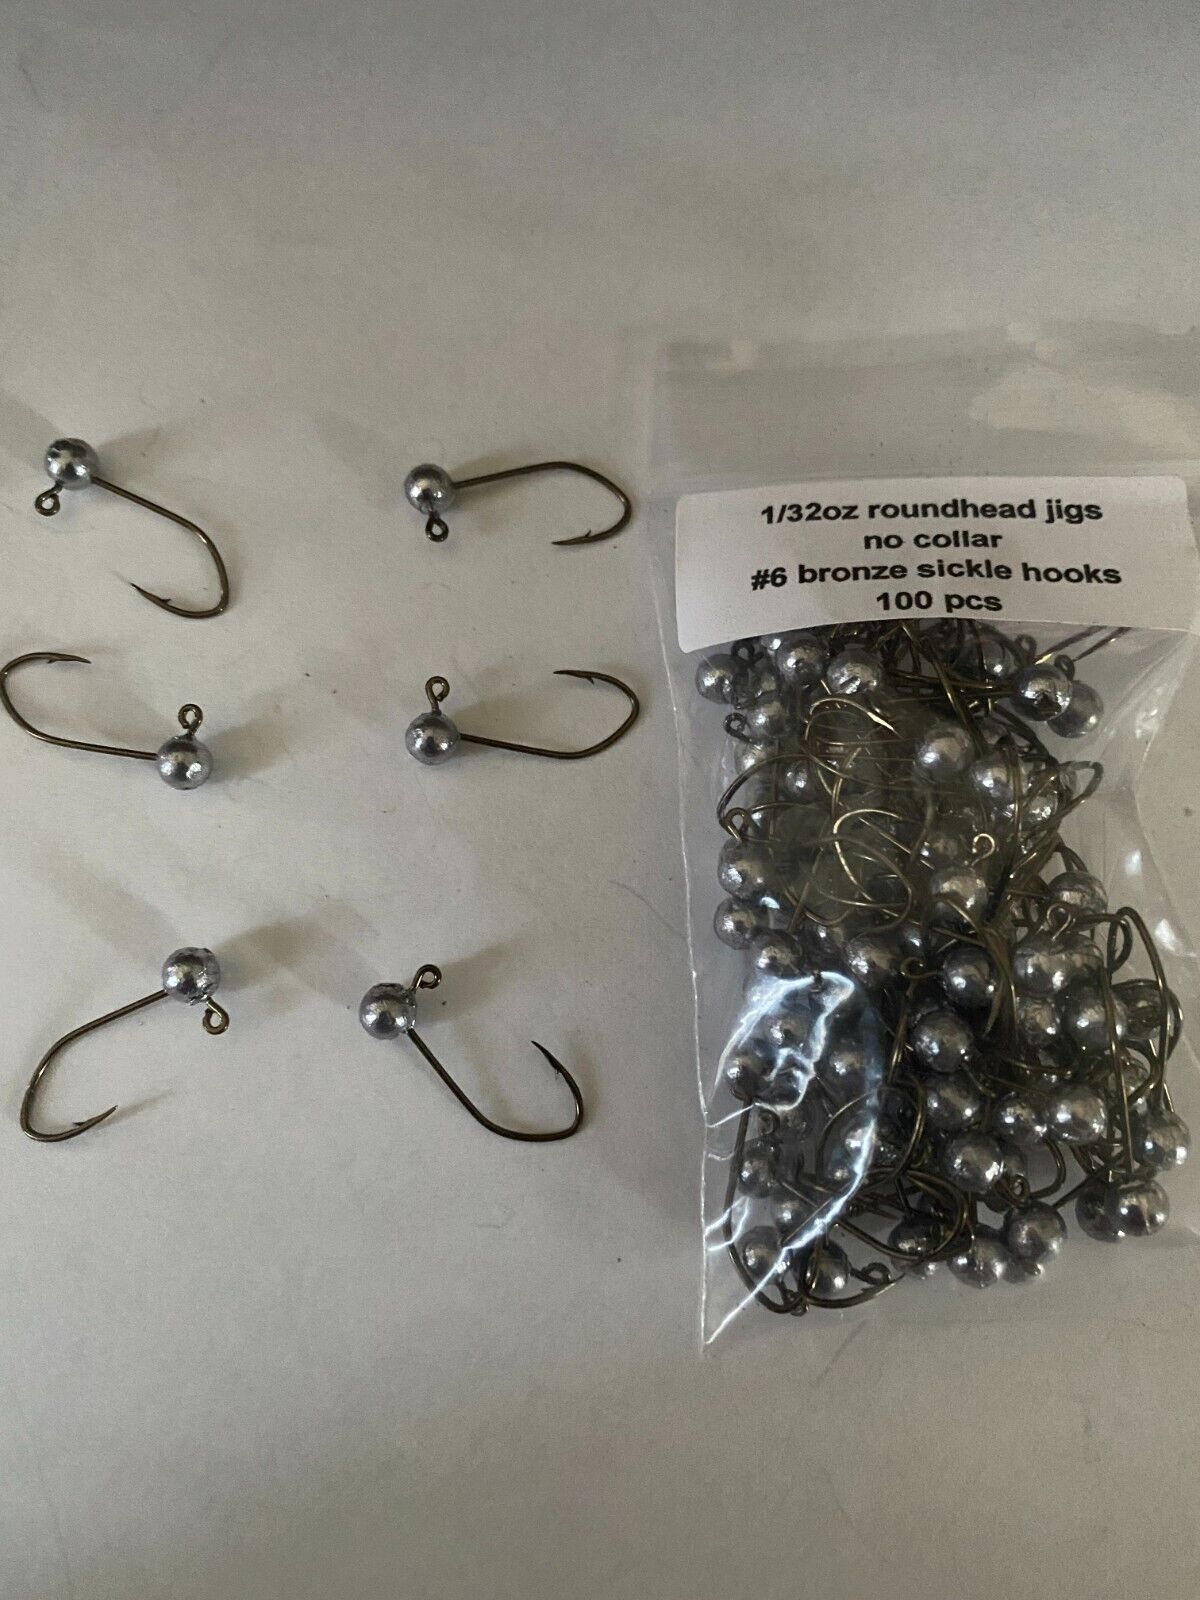 1/32oz Roundhead jig with no collar with #6 or #4 bronze sickle hooks 100  pcs